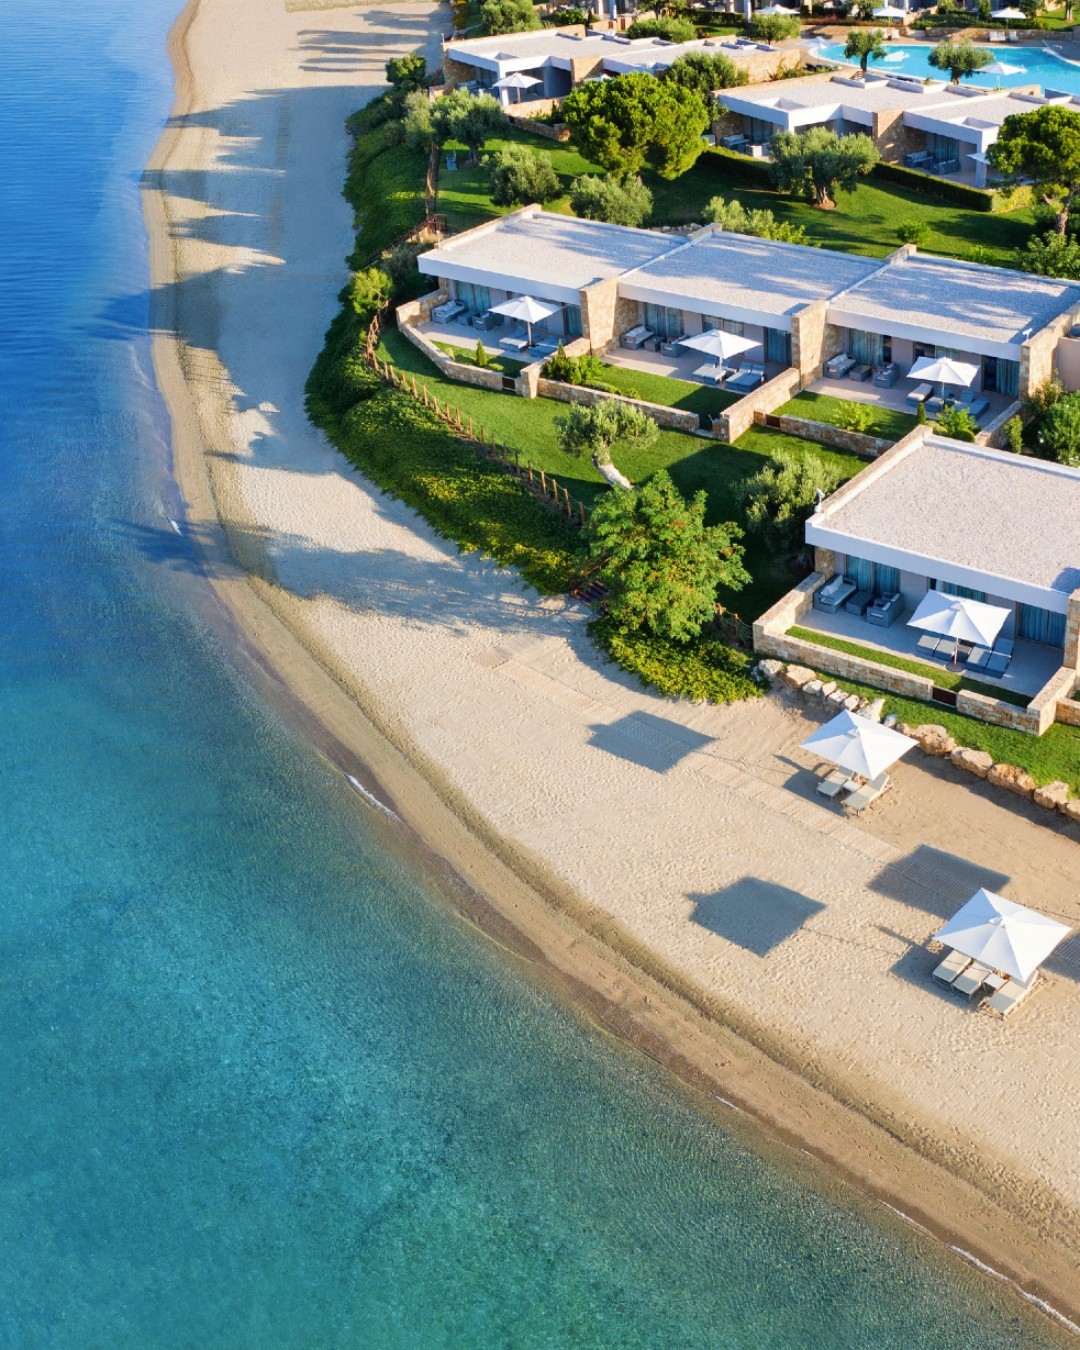 Infinite care and absolute freedom - Enjoy the World of Ikos - Best Resorts in Turkey and Greece